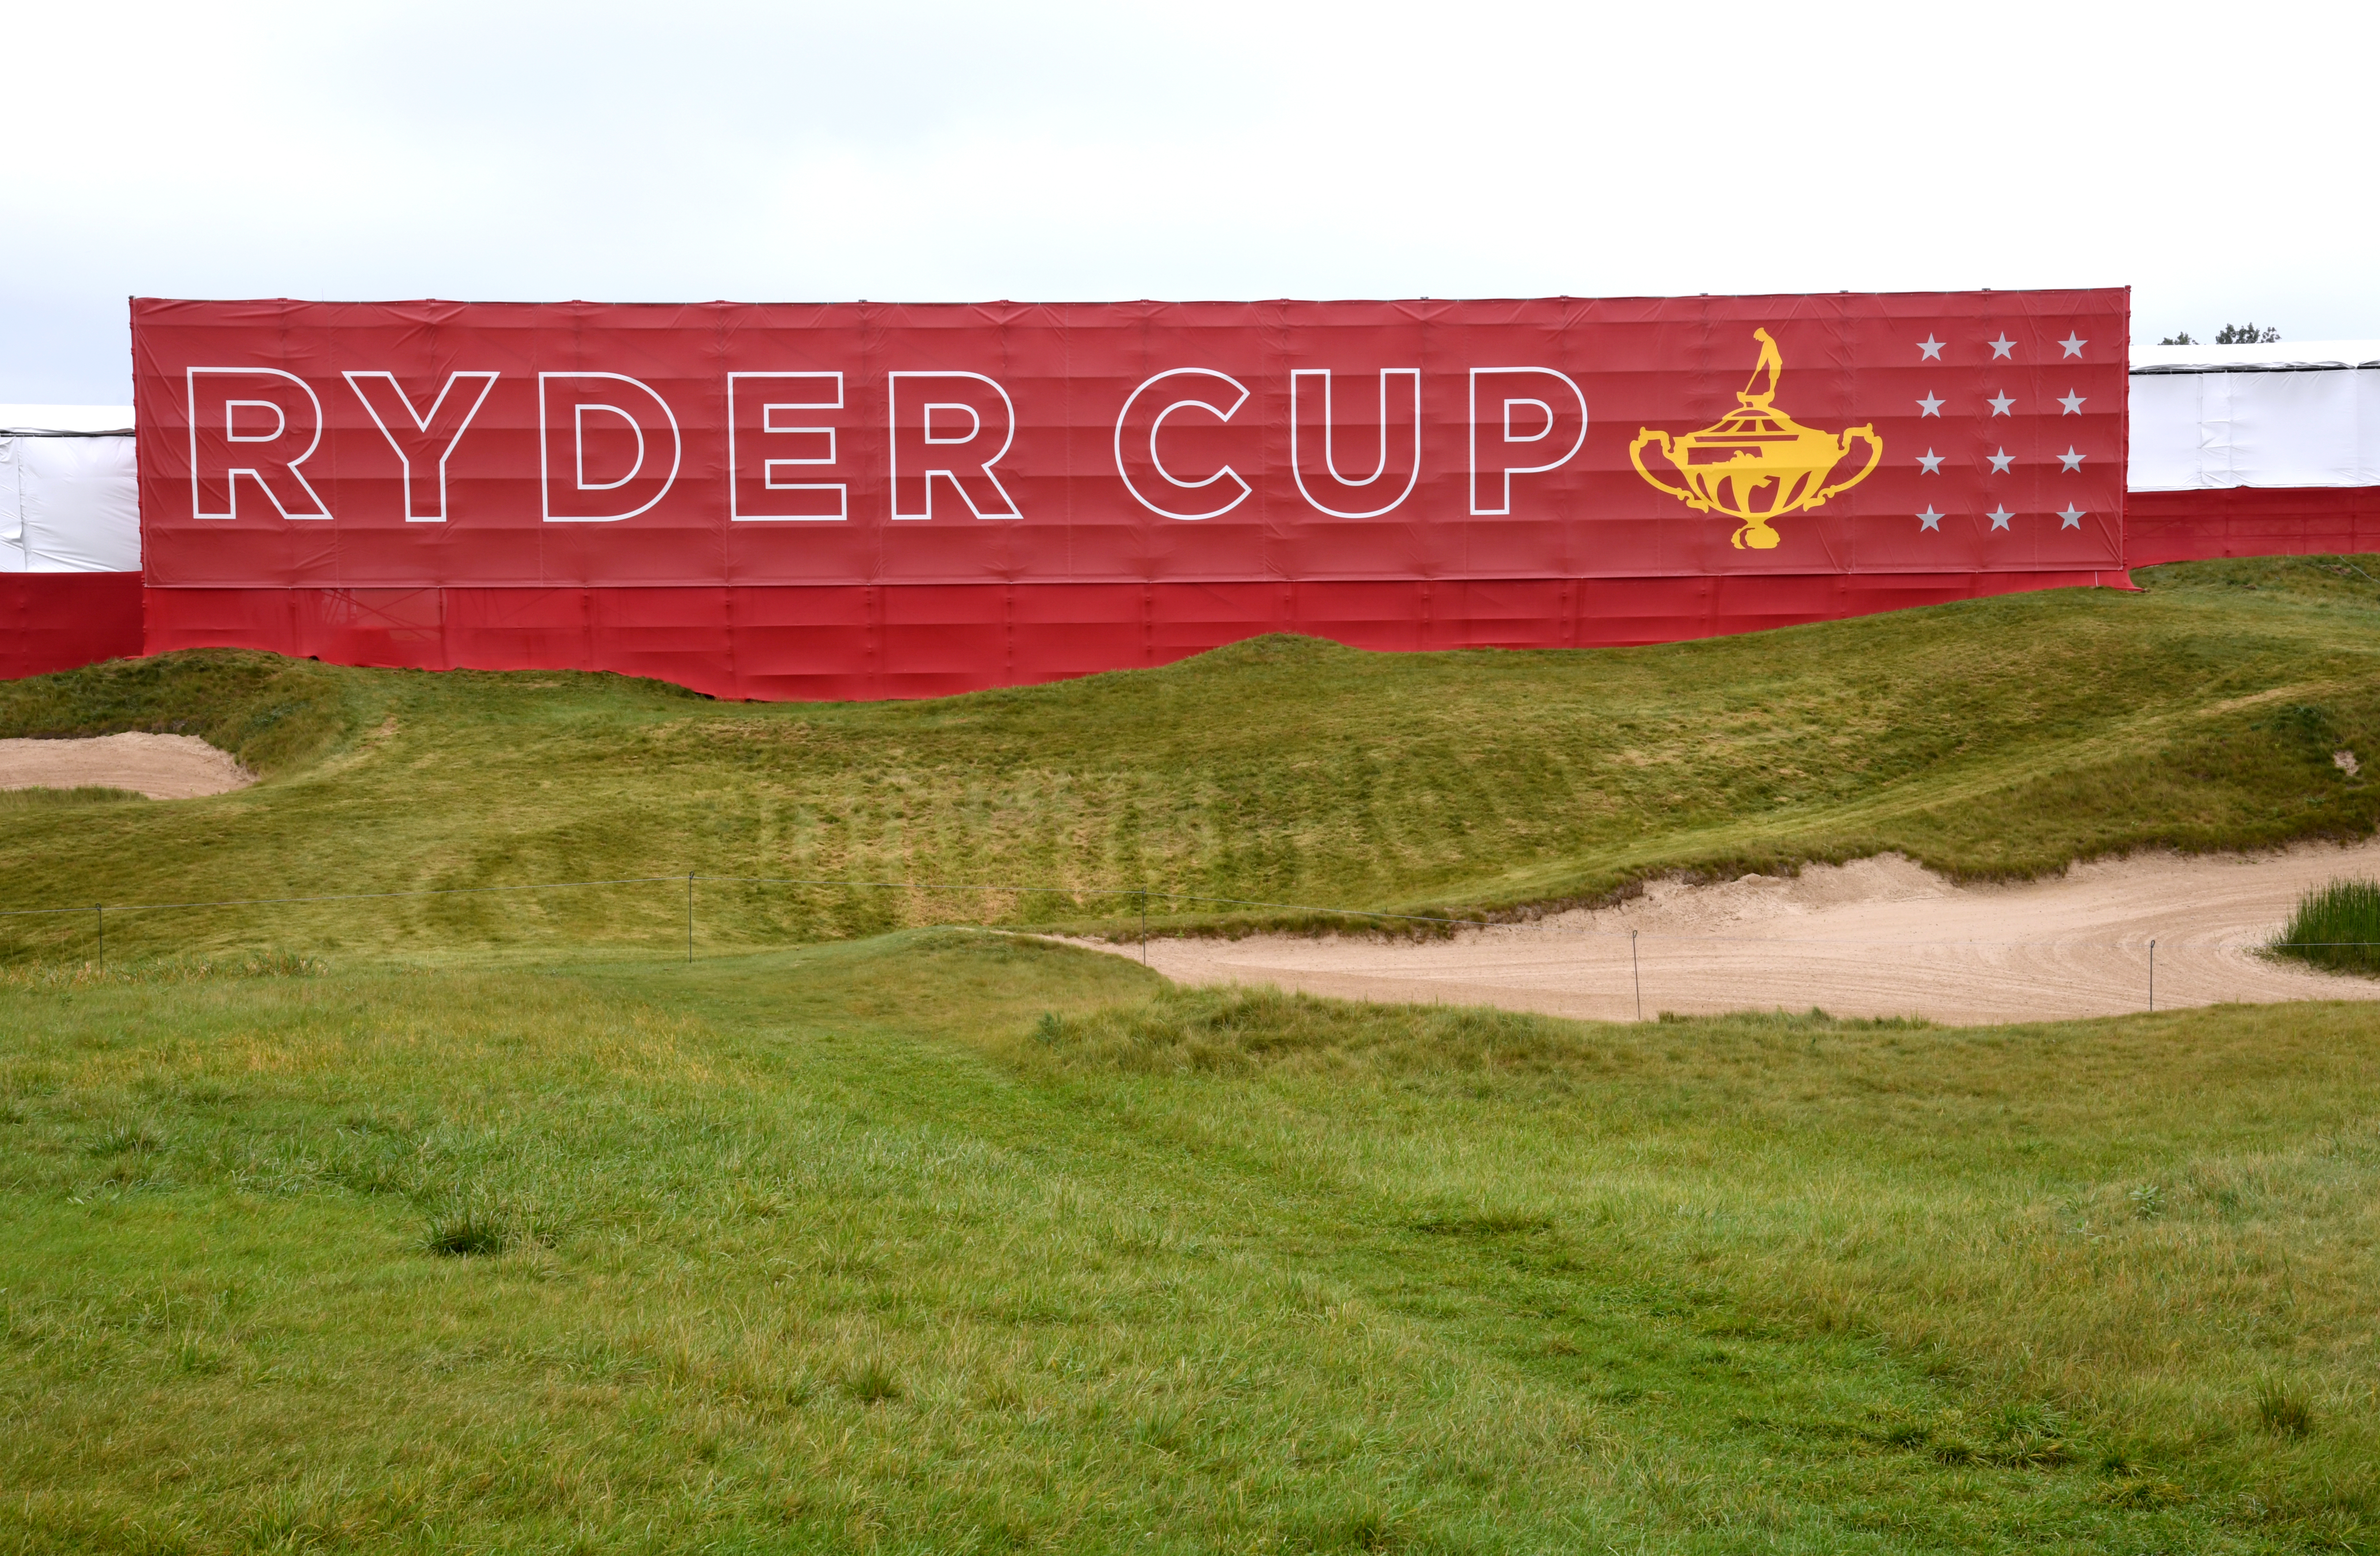 43rd Ryder Cup - Preview Day One - Whistling Straits